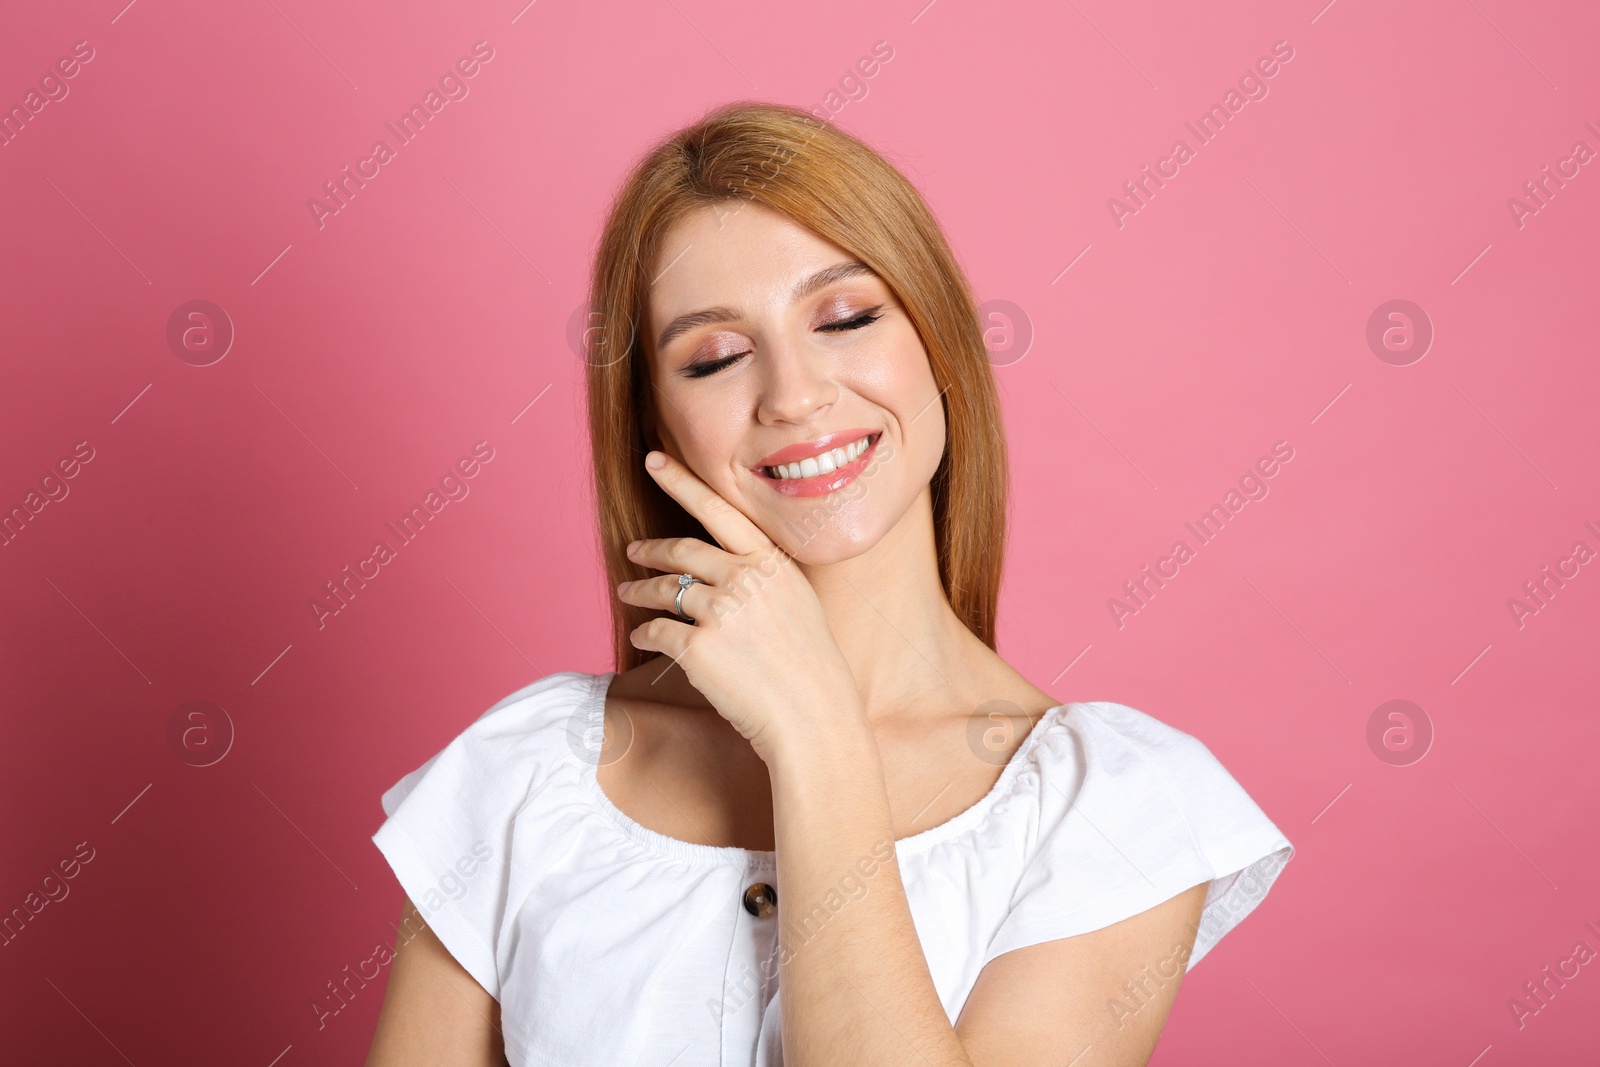 Photo of Happy woman with engagement ring on pink background